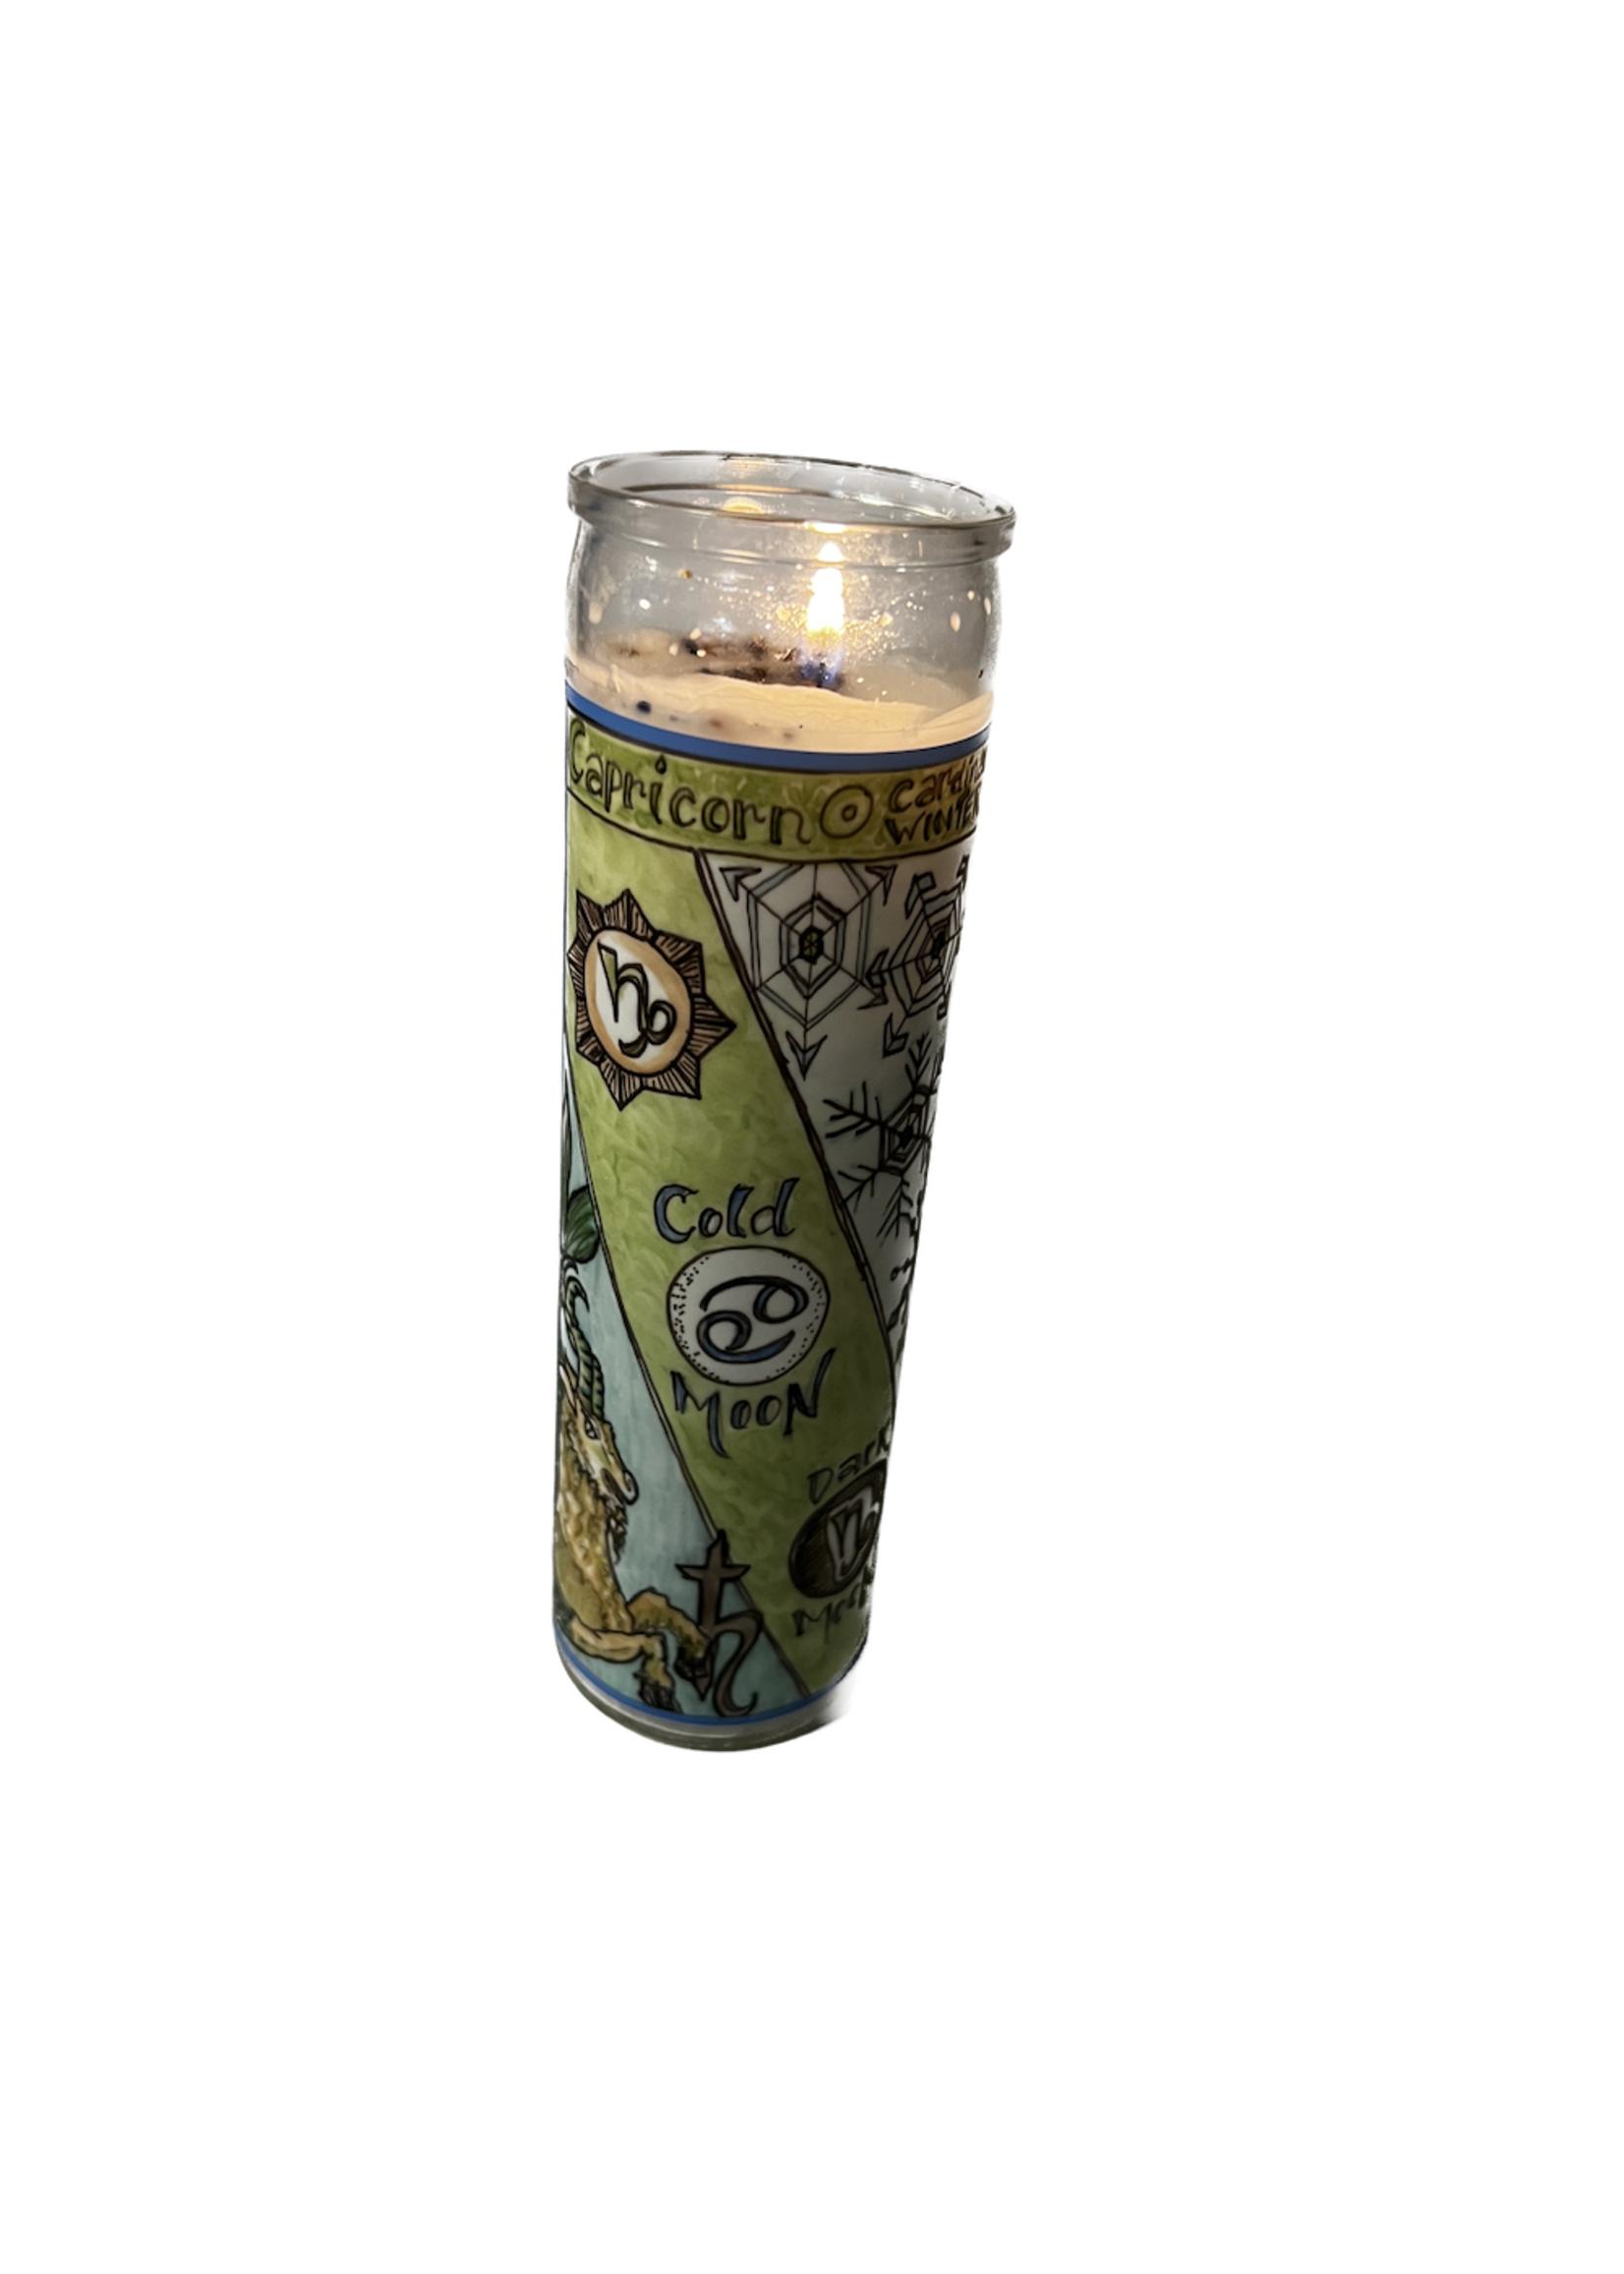 Capricorn Cancer Pairing: Lunar Magick Candle Loaded and Charged by Heron Michelle